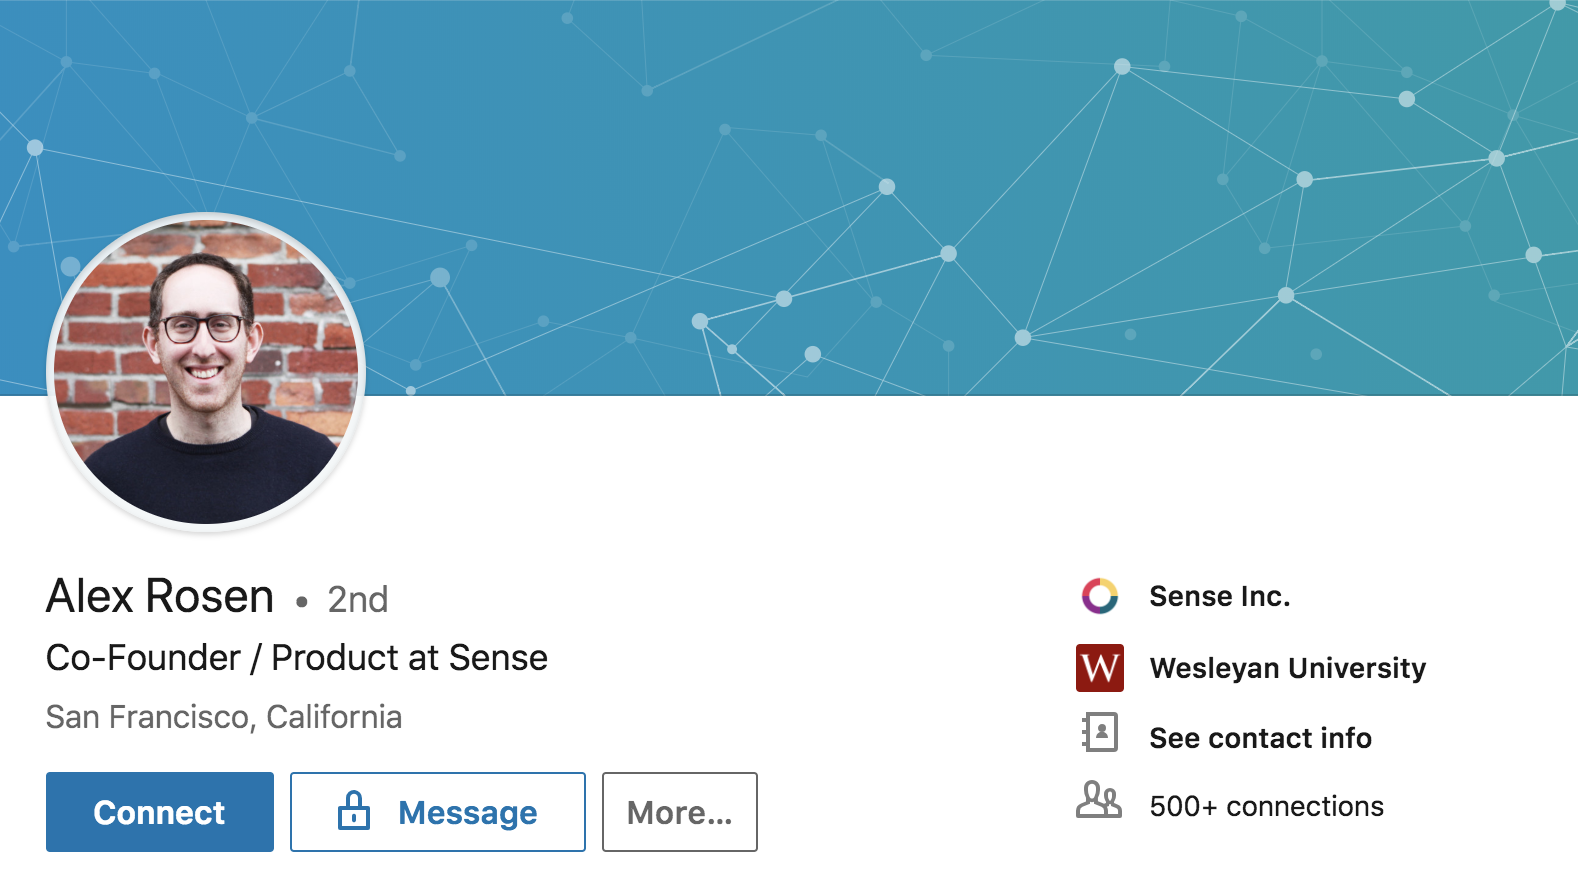 Bio of Alex Rosen, co-founder of Sense and Head of Product management